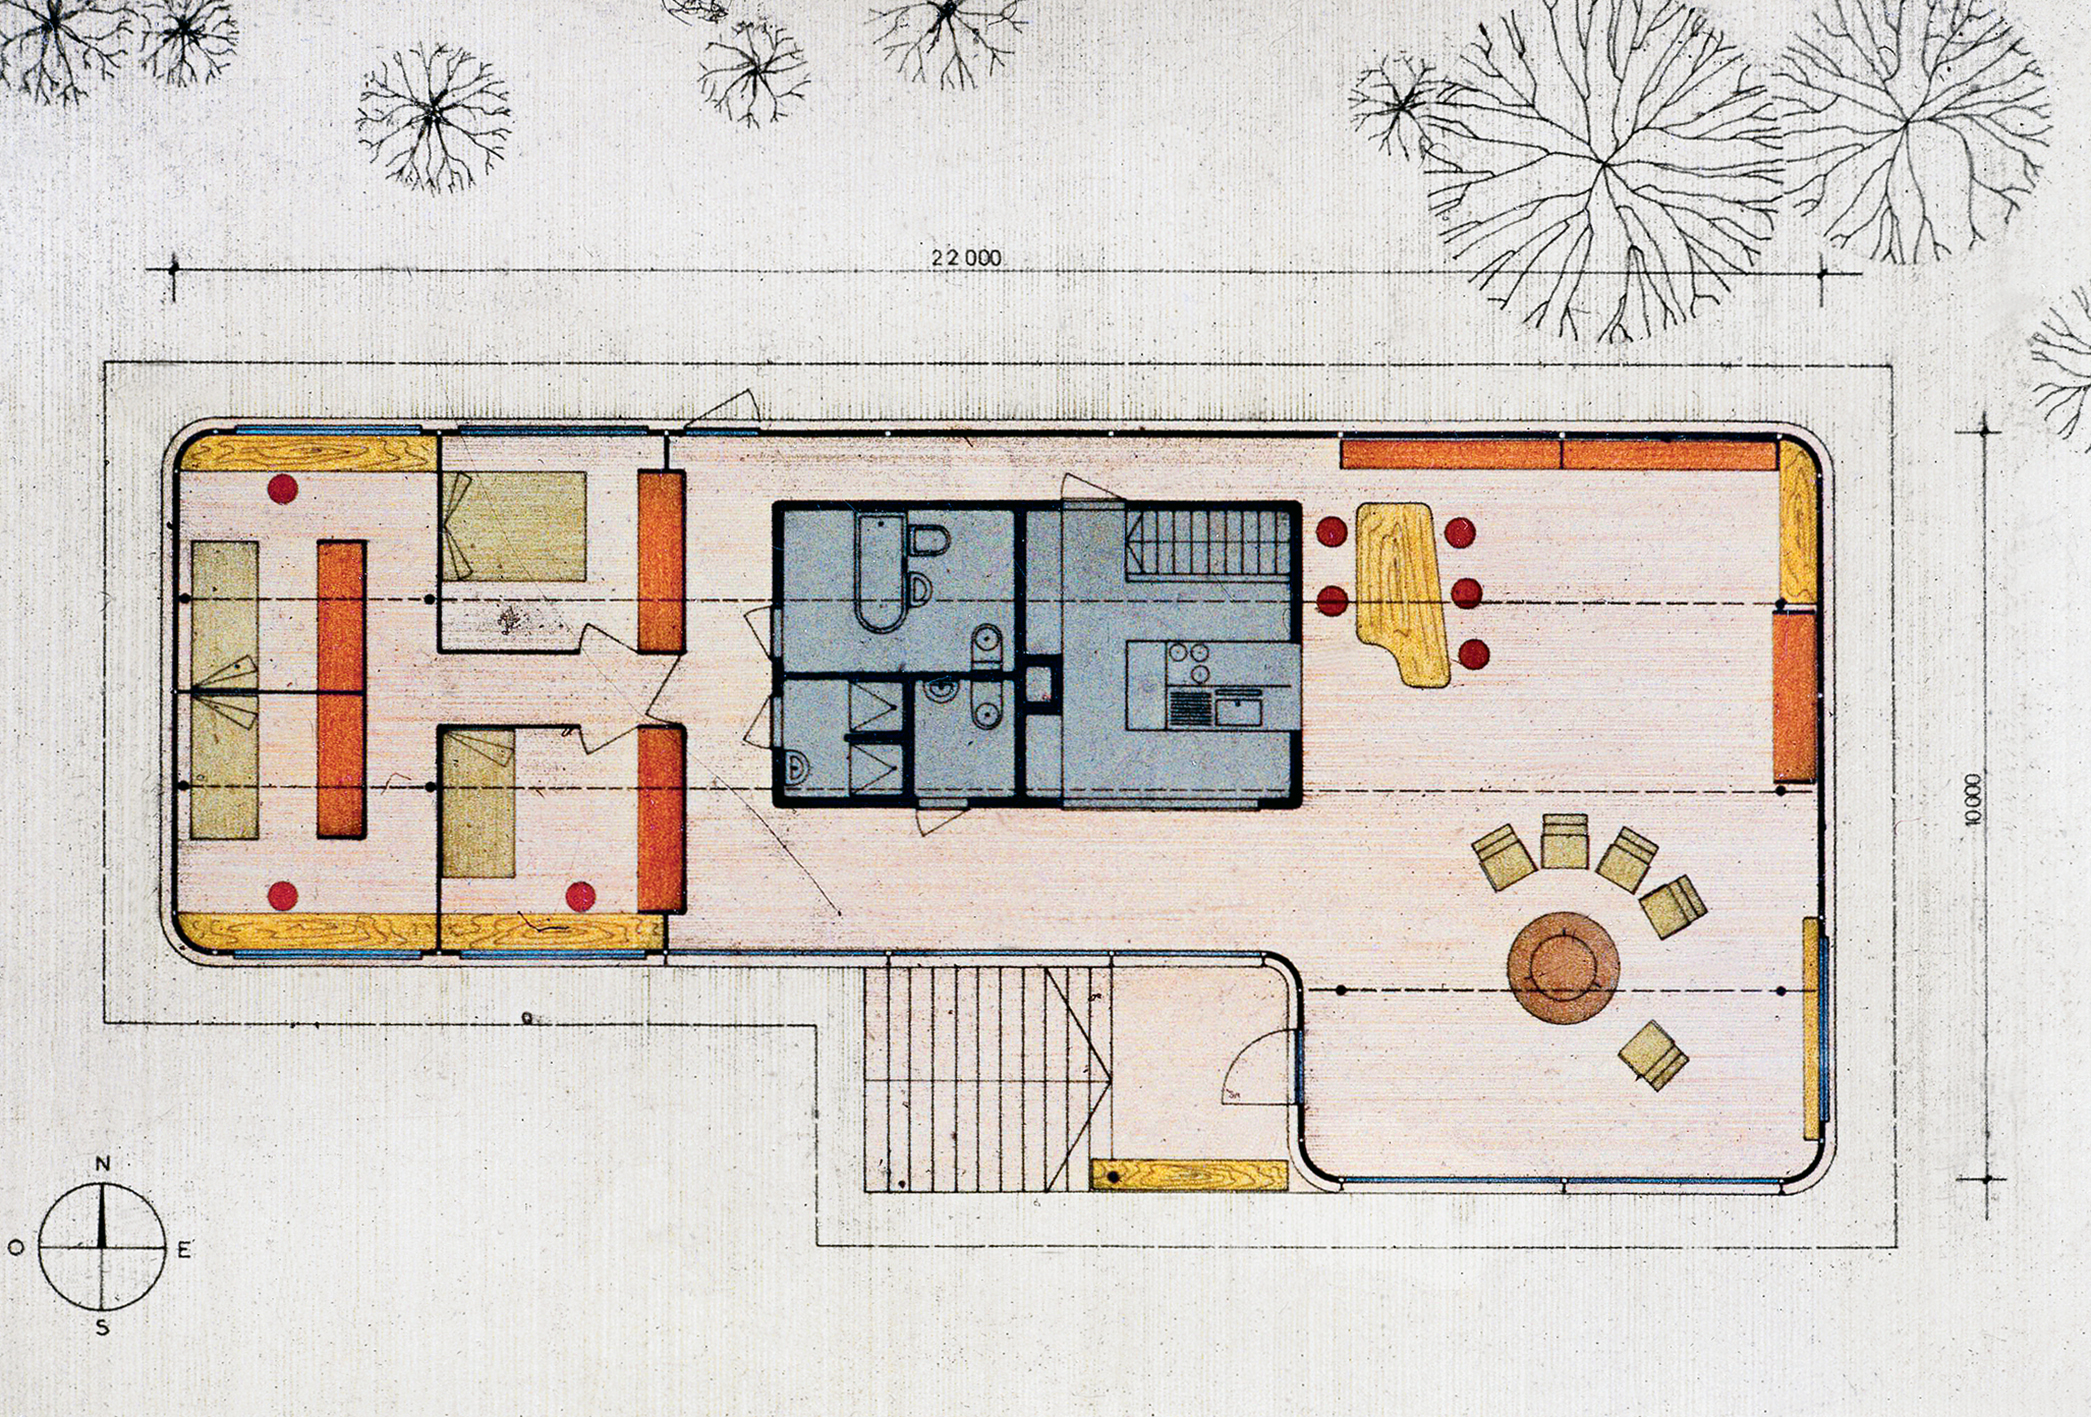 Gauthier house, 1961-62 (Jean Prouvé, with architects H. Baumann and E. Remondino). Floor plan and layout.